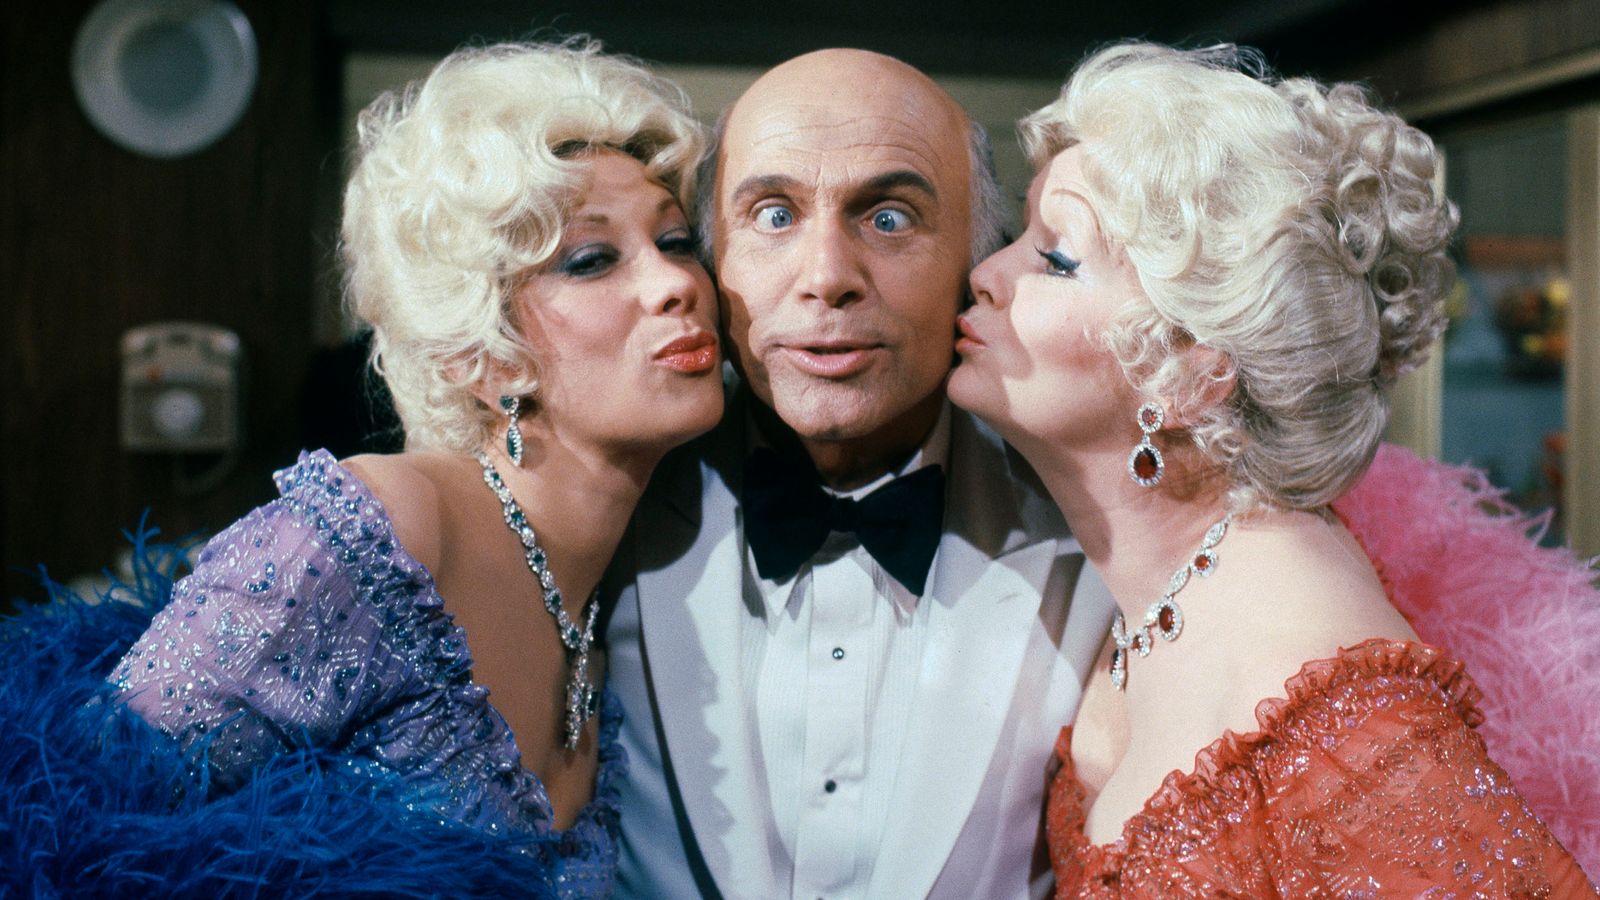 Gavin MacLeod: Star of The Love Boat and The Mary Tyler Moore Show dies aged 90